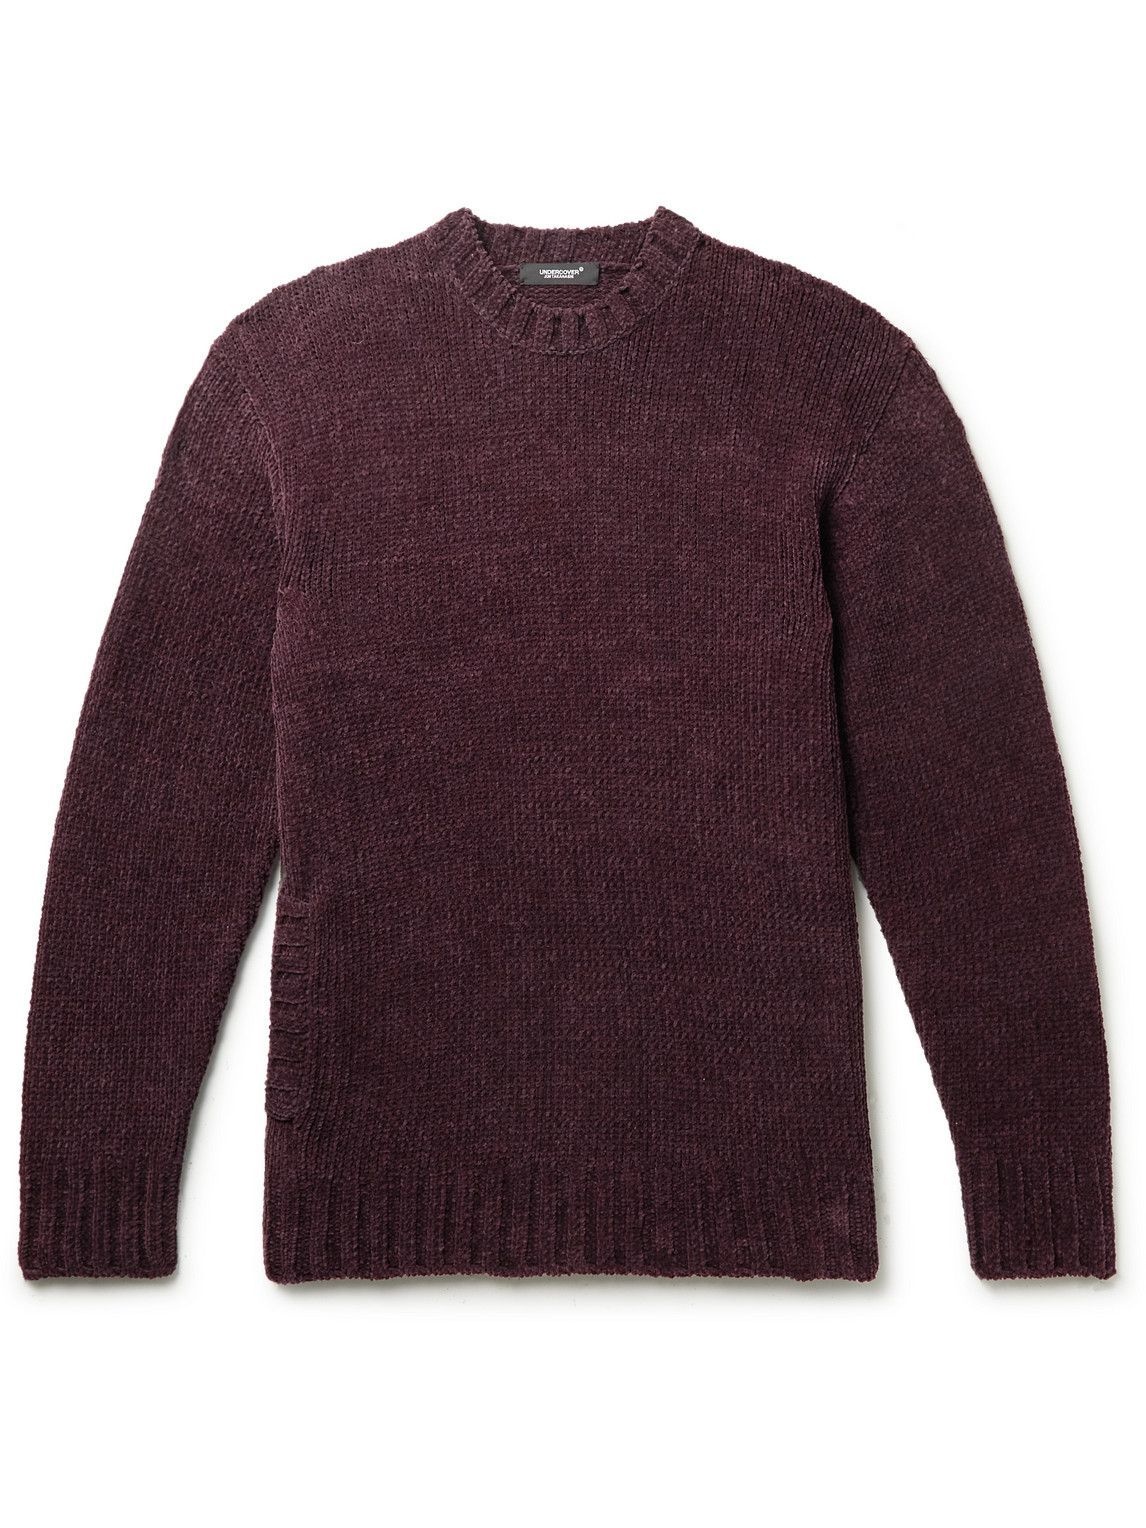 UNDERCOVER - Cotton-Blend Chenille Sweater - Brown Undercover